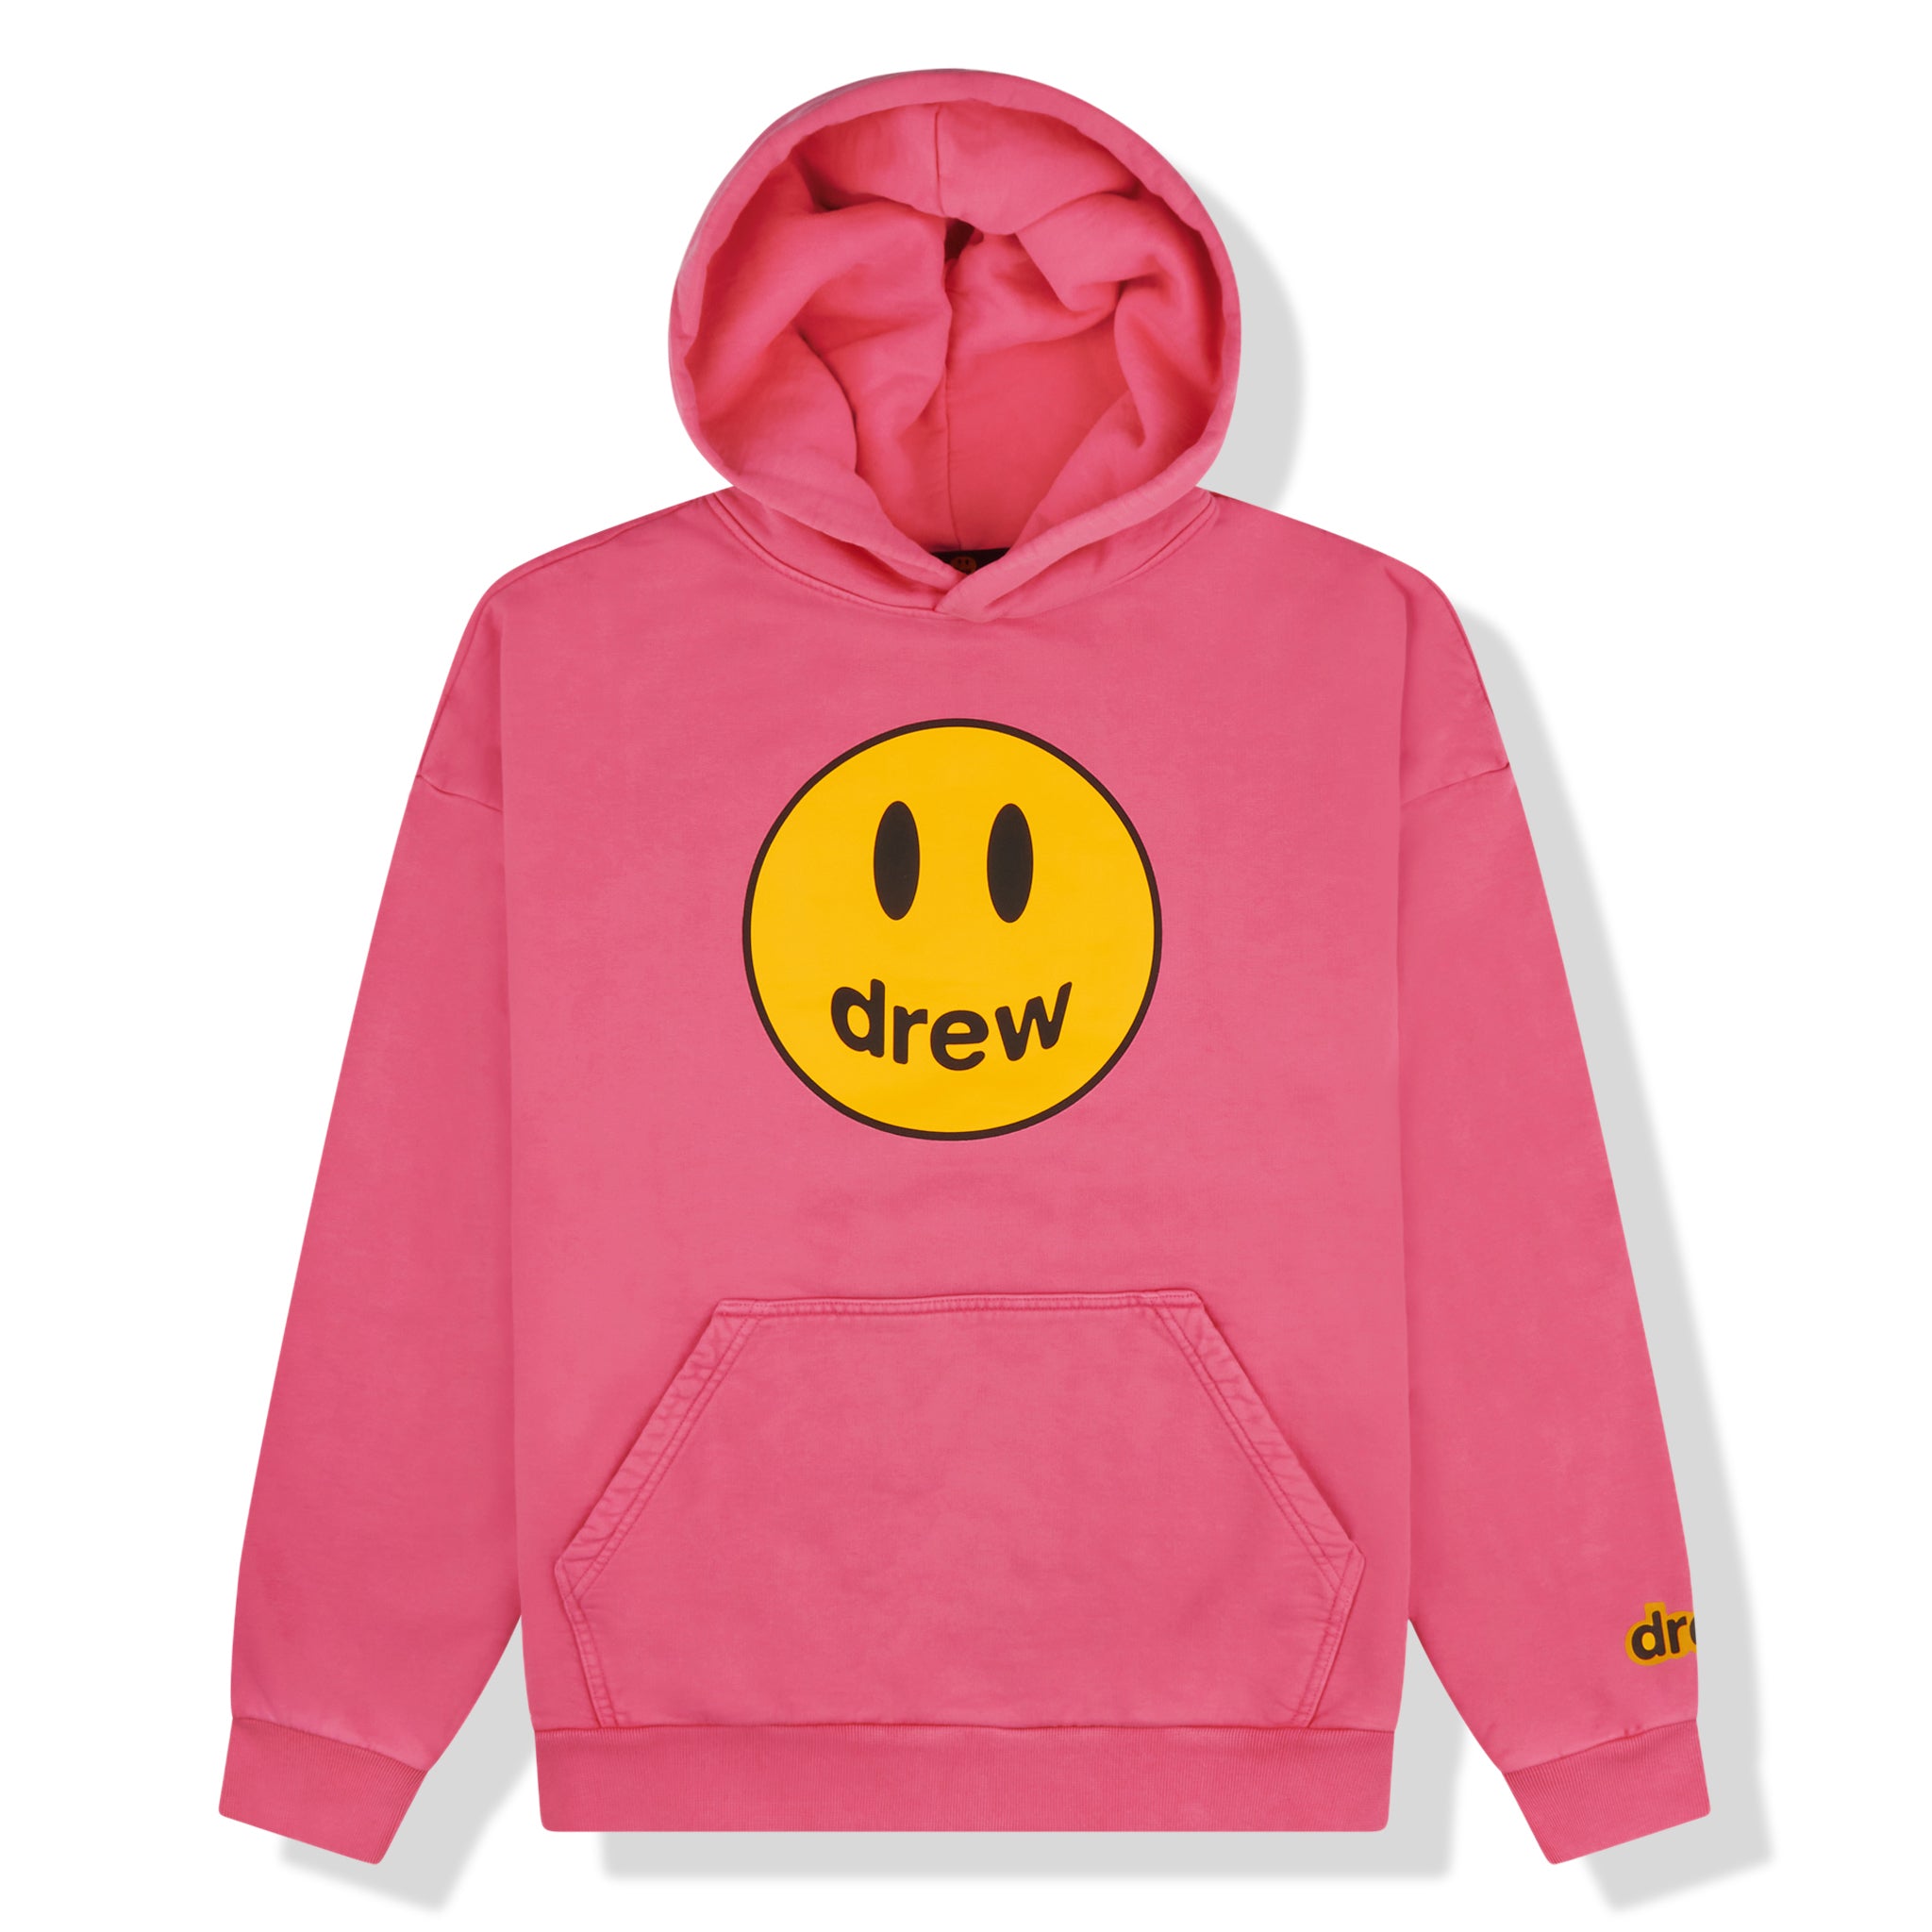 drewhouse mascot hoodie pink size S